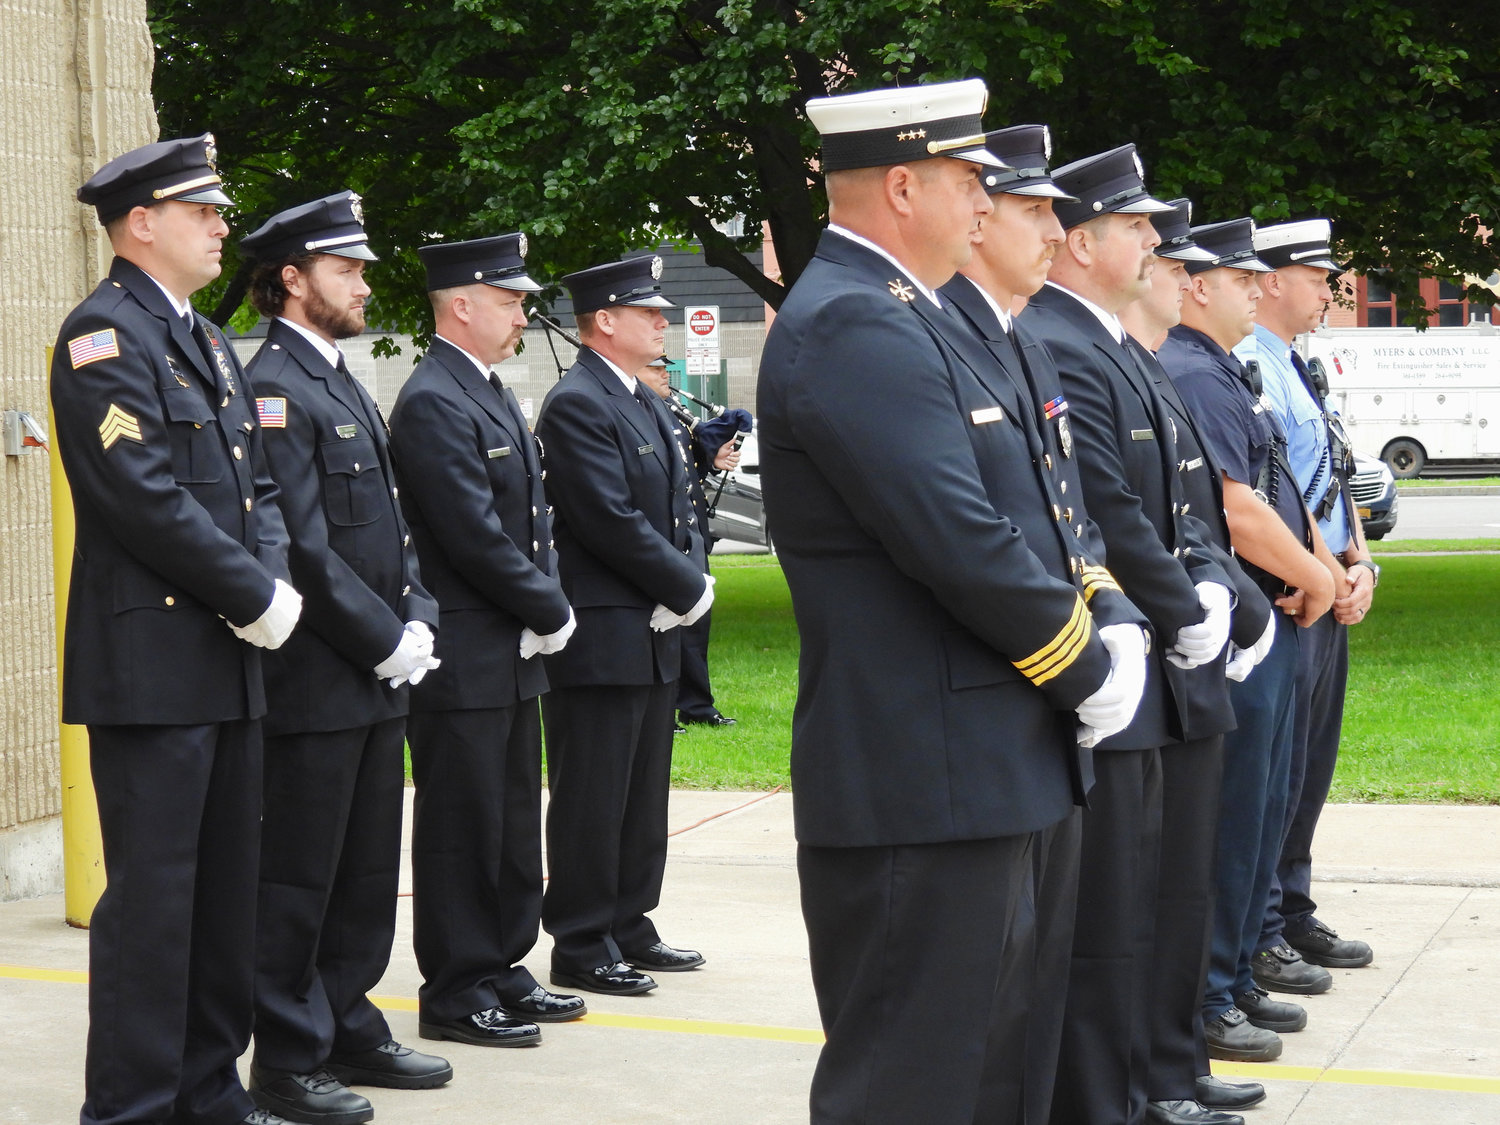 Members of the Oneida Fire Department and Police Department stand at attention, honoring and remembering those that lost their lives during 9/11